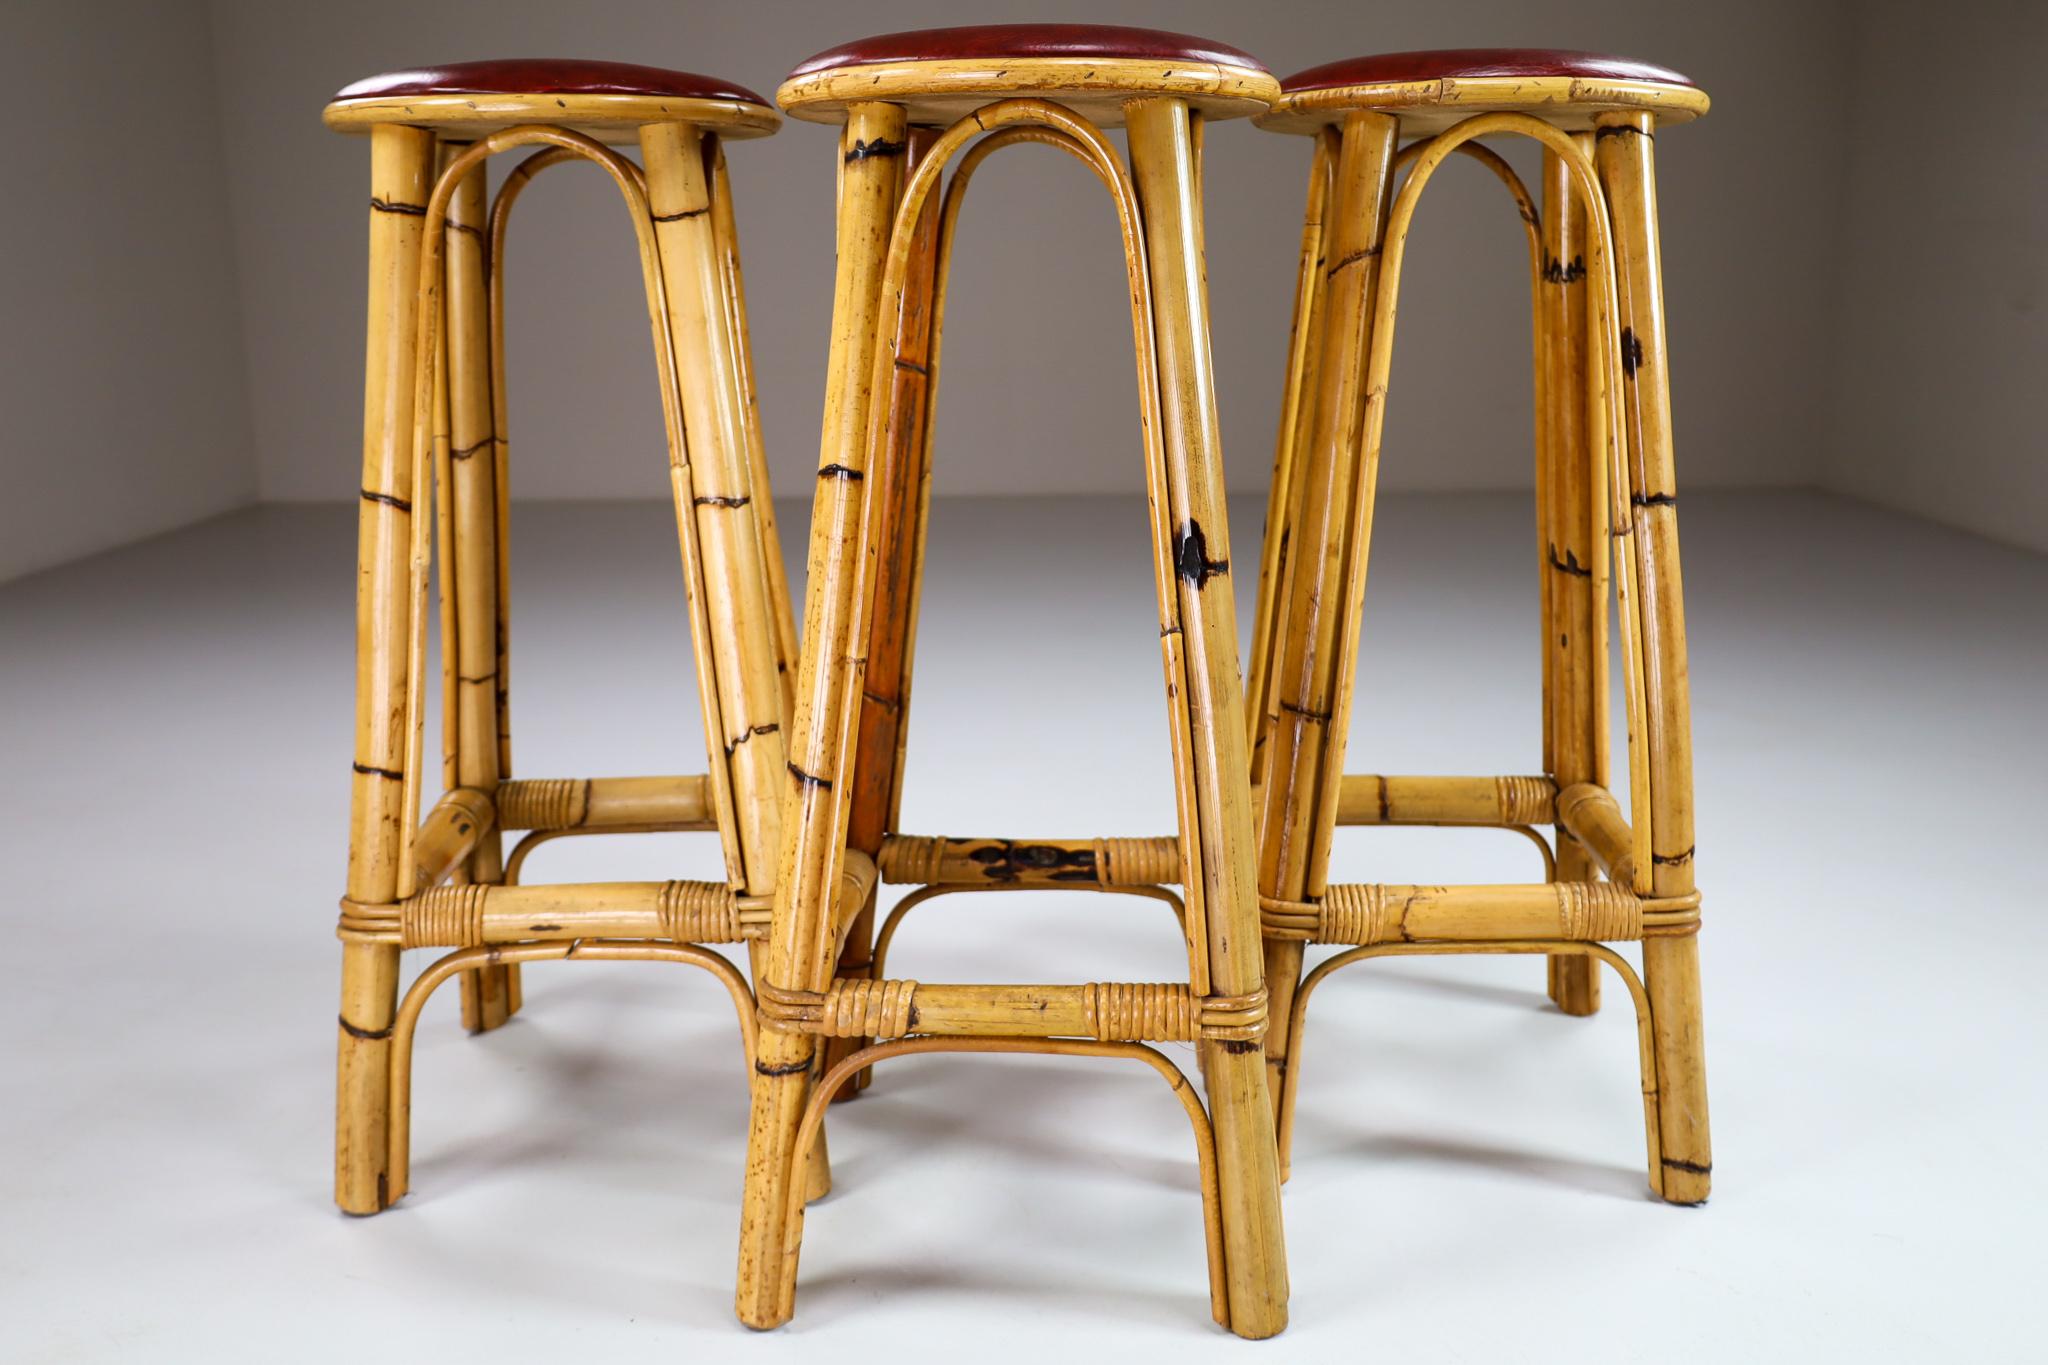 Set of three vintage bamboo barstools with red leather seats. Made in France in 1950s. With minor signs of wear, a very good condition. Hard-wearing and built for commercial duty, these in-demand stools would be equally at home in a cafe bar,